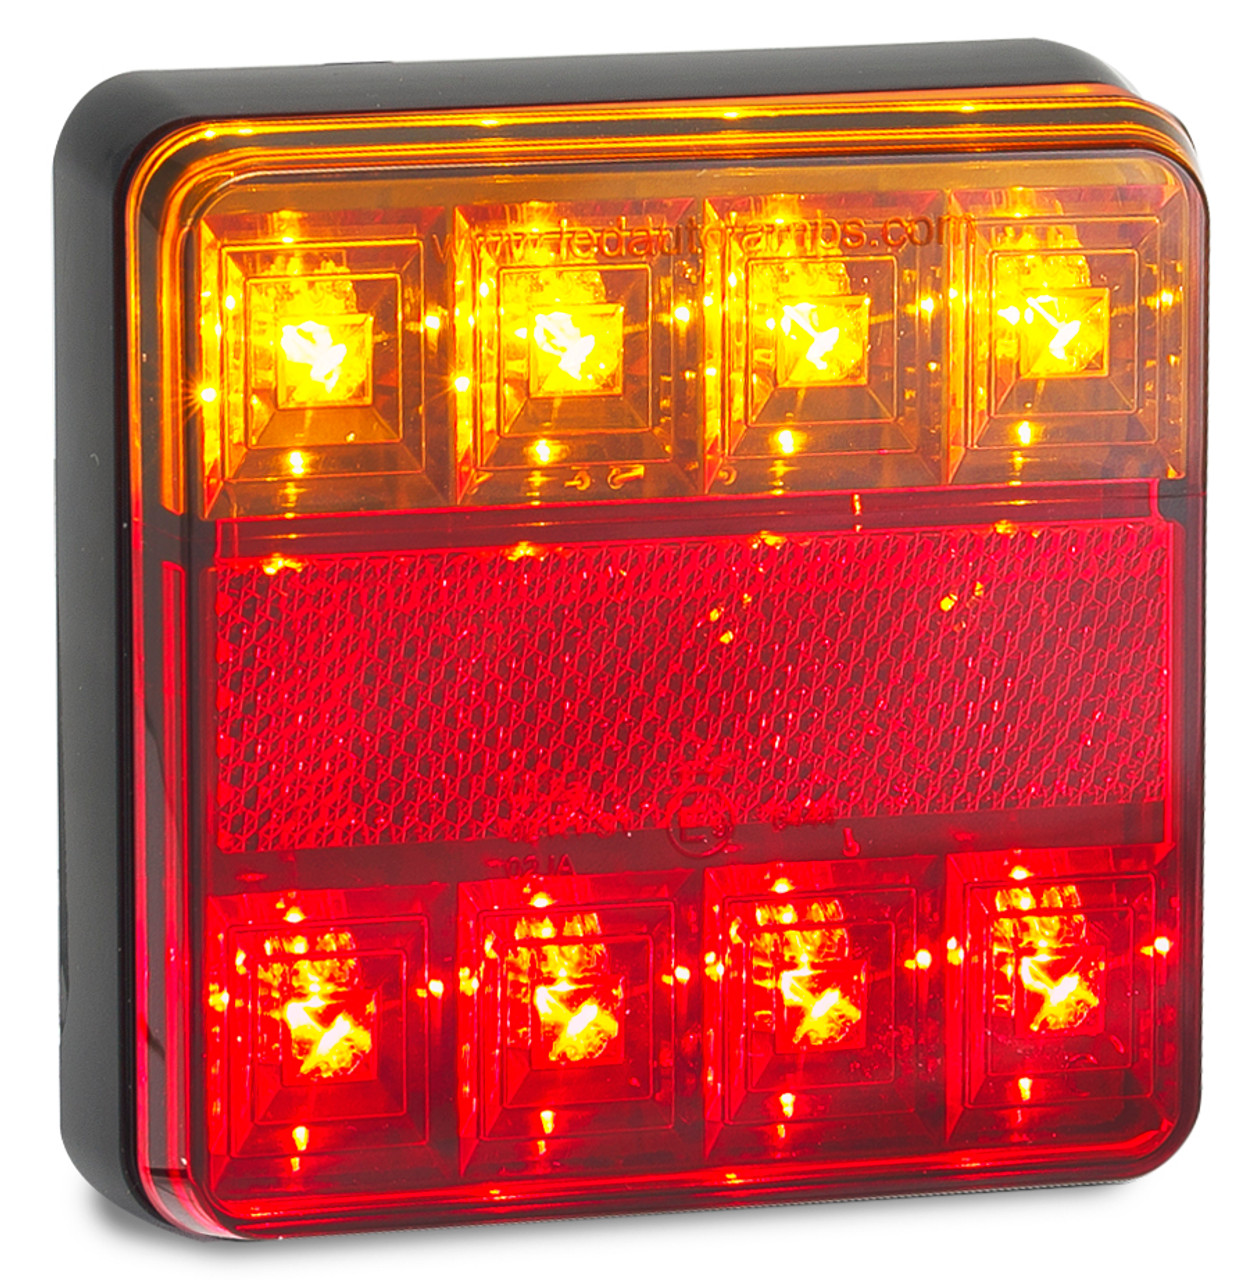 101BAR - Combination Tail Light. Small Trailer Rear Light. Stop, Tail, Indicator, Reflector Light 12v Blister Single Pack. LED Auto Lamps.  Ultimate LED. 